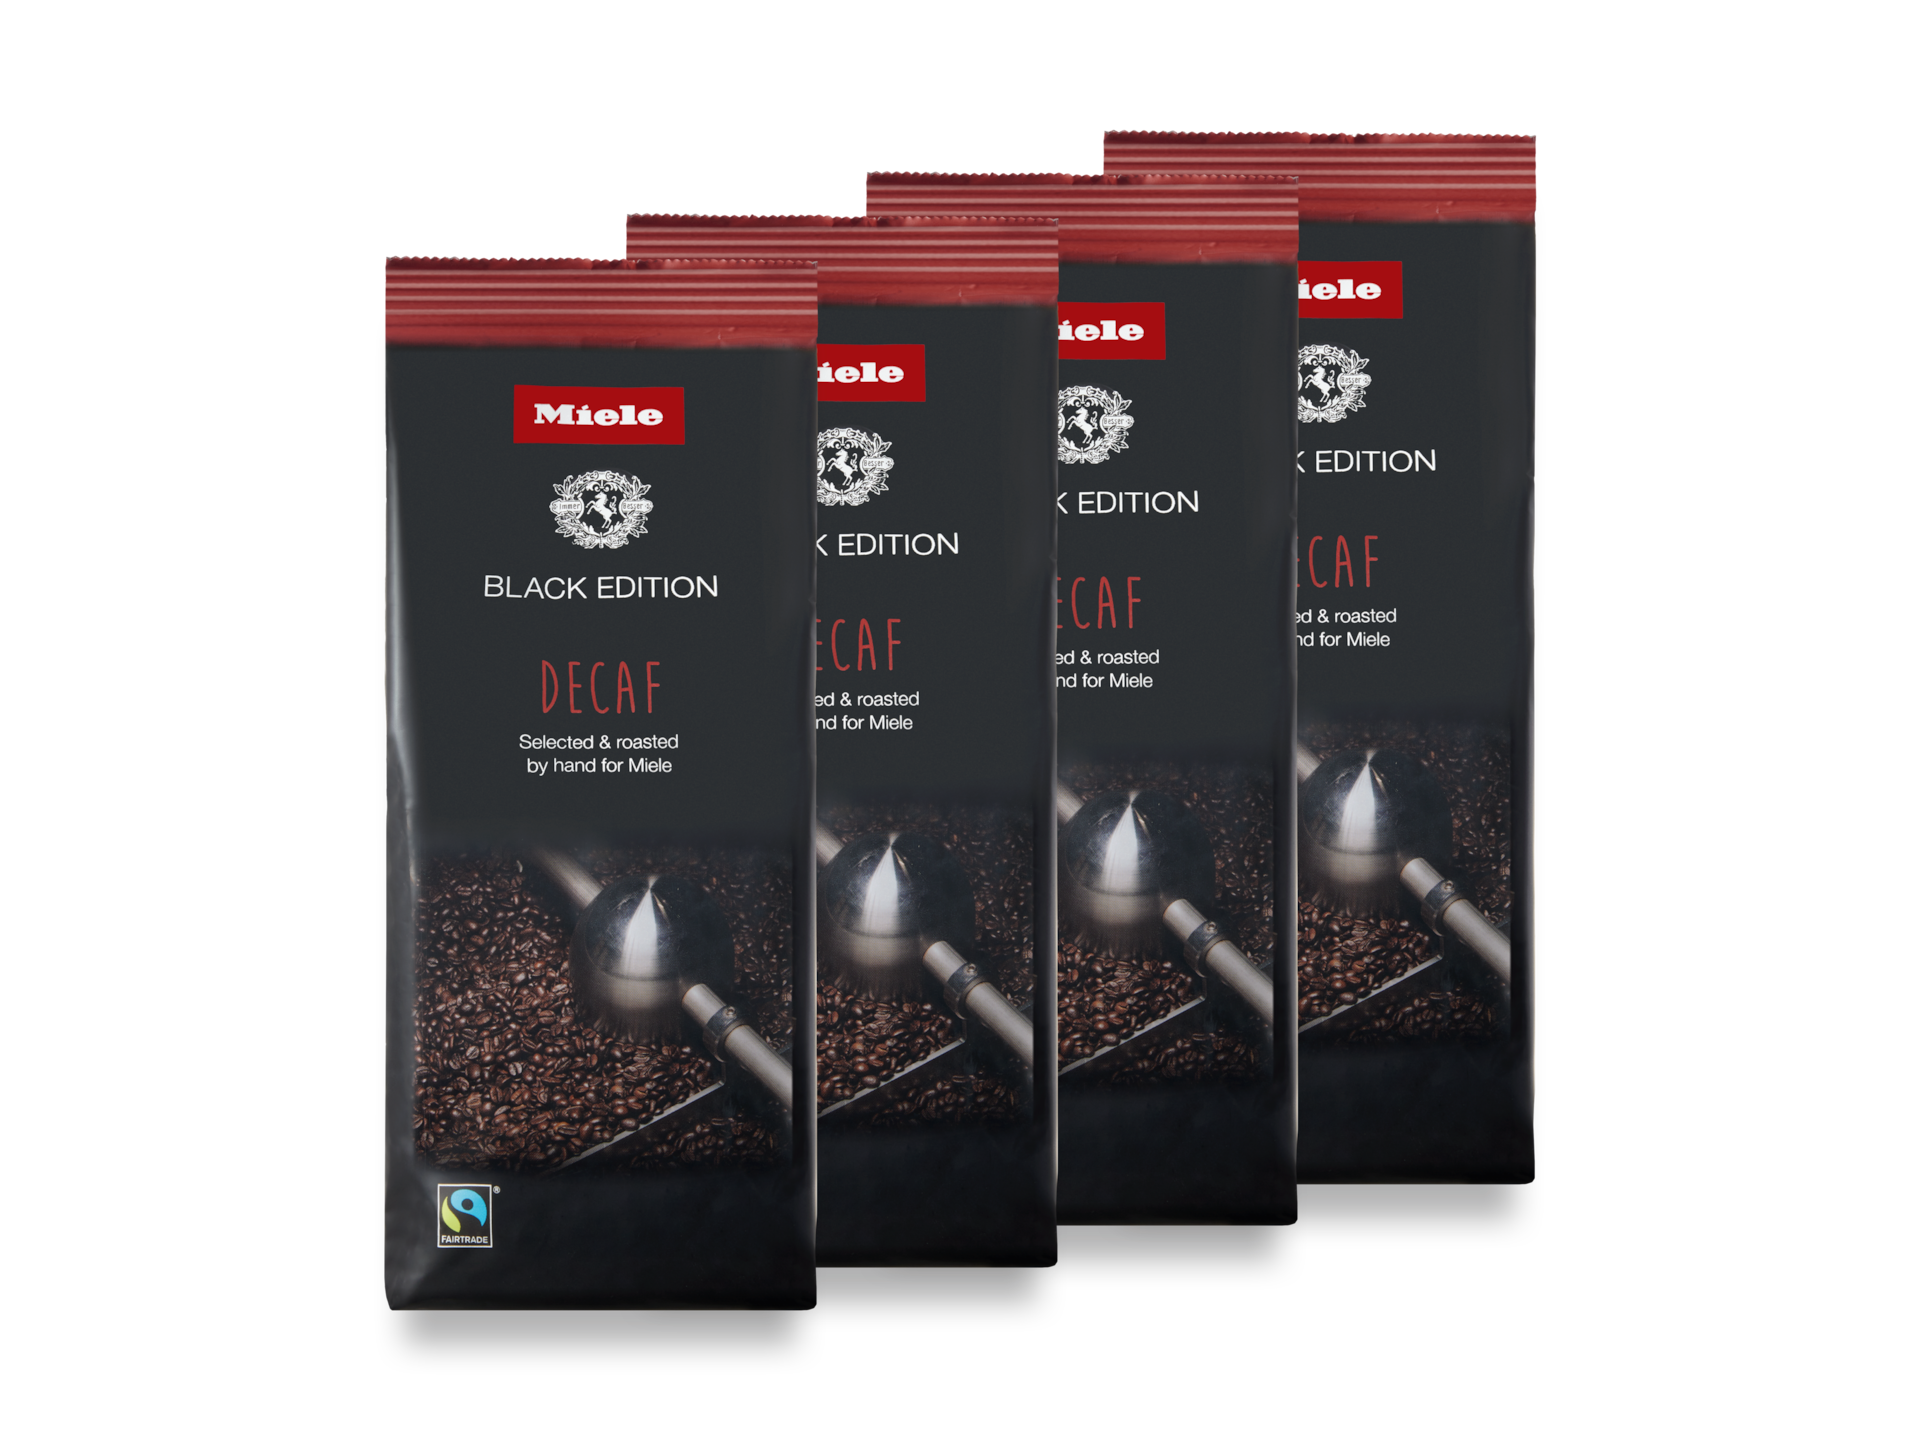 Accessories/Consumables (A&C) - Miele Black Edition DECAF 4x250g - 1